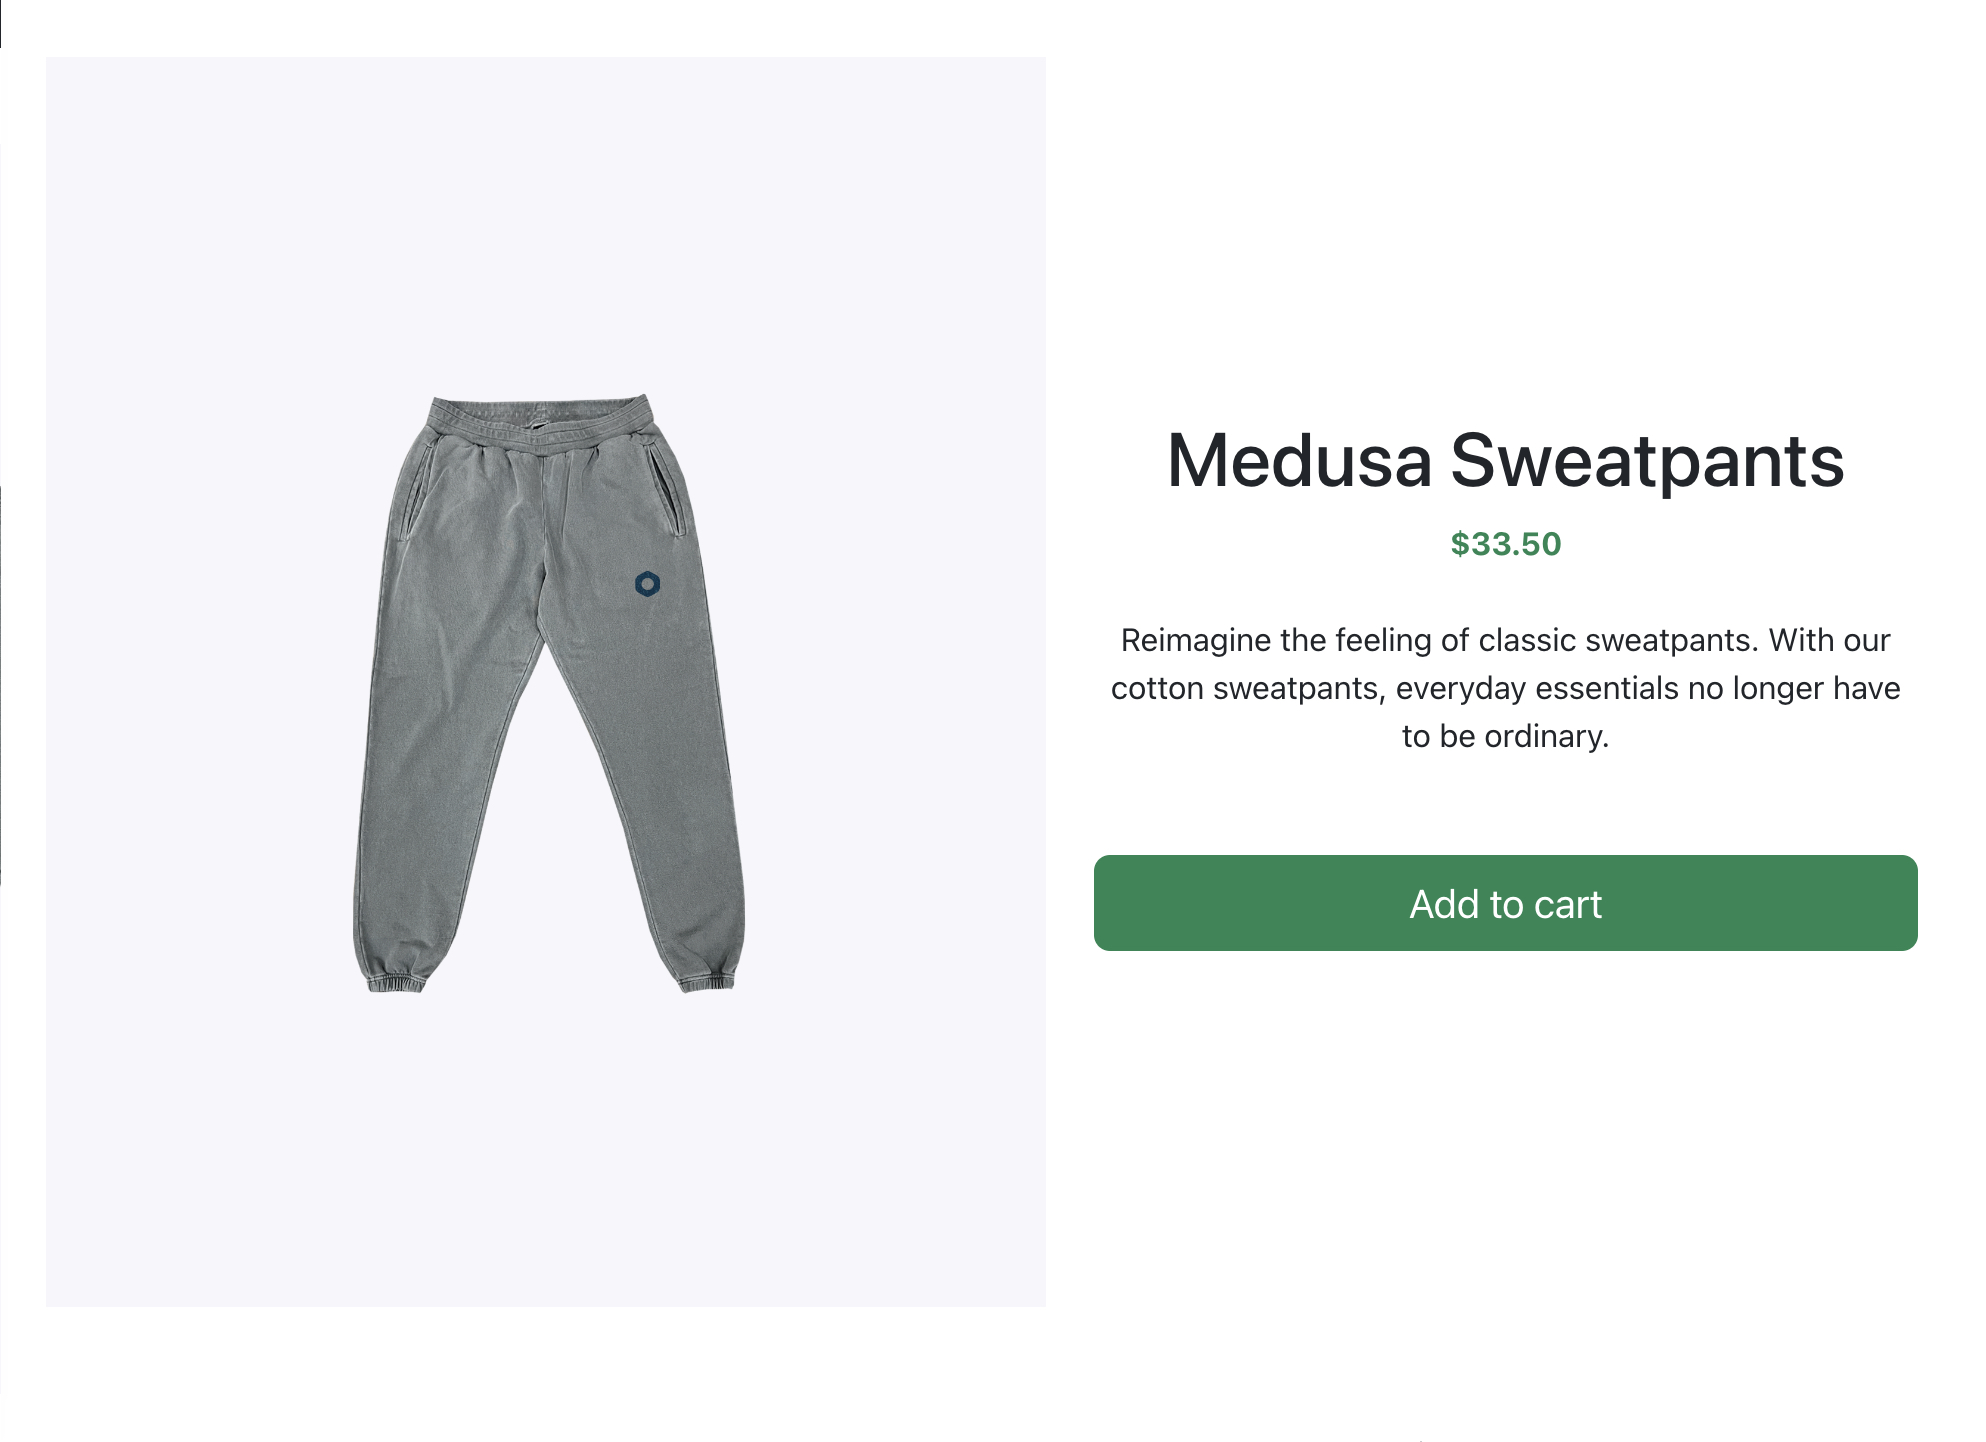 Product page for the Medusa Sweatpants